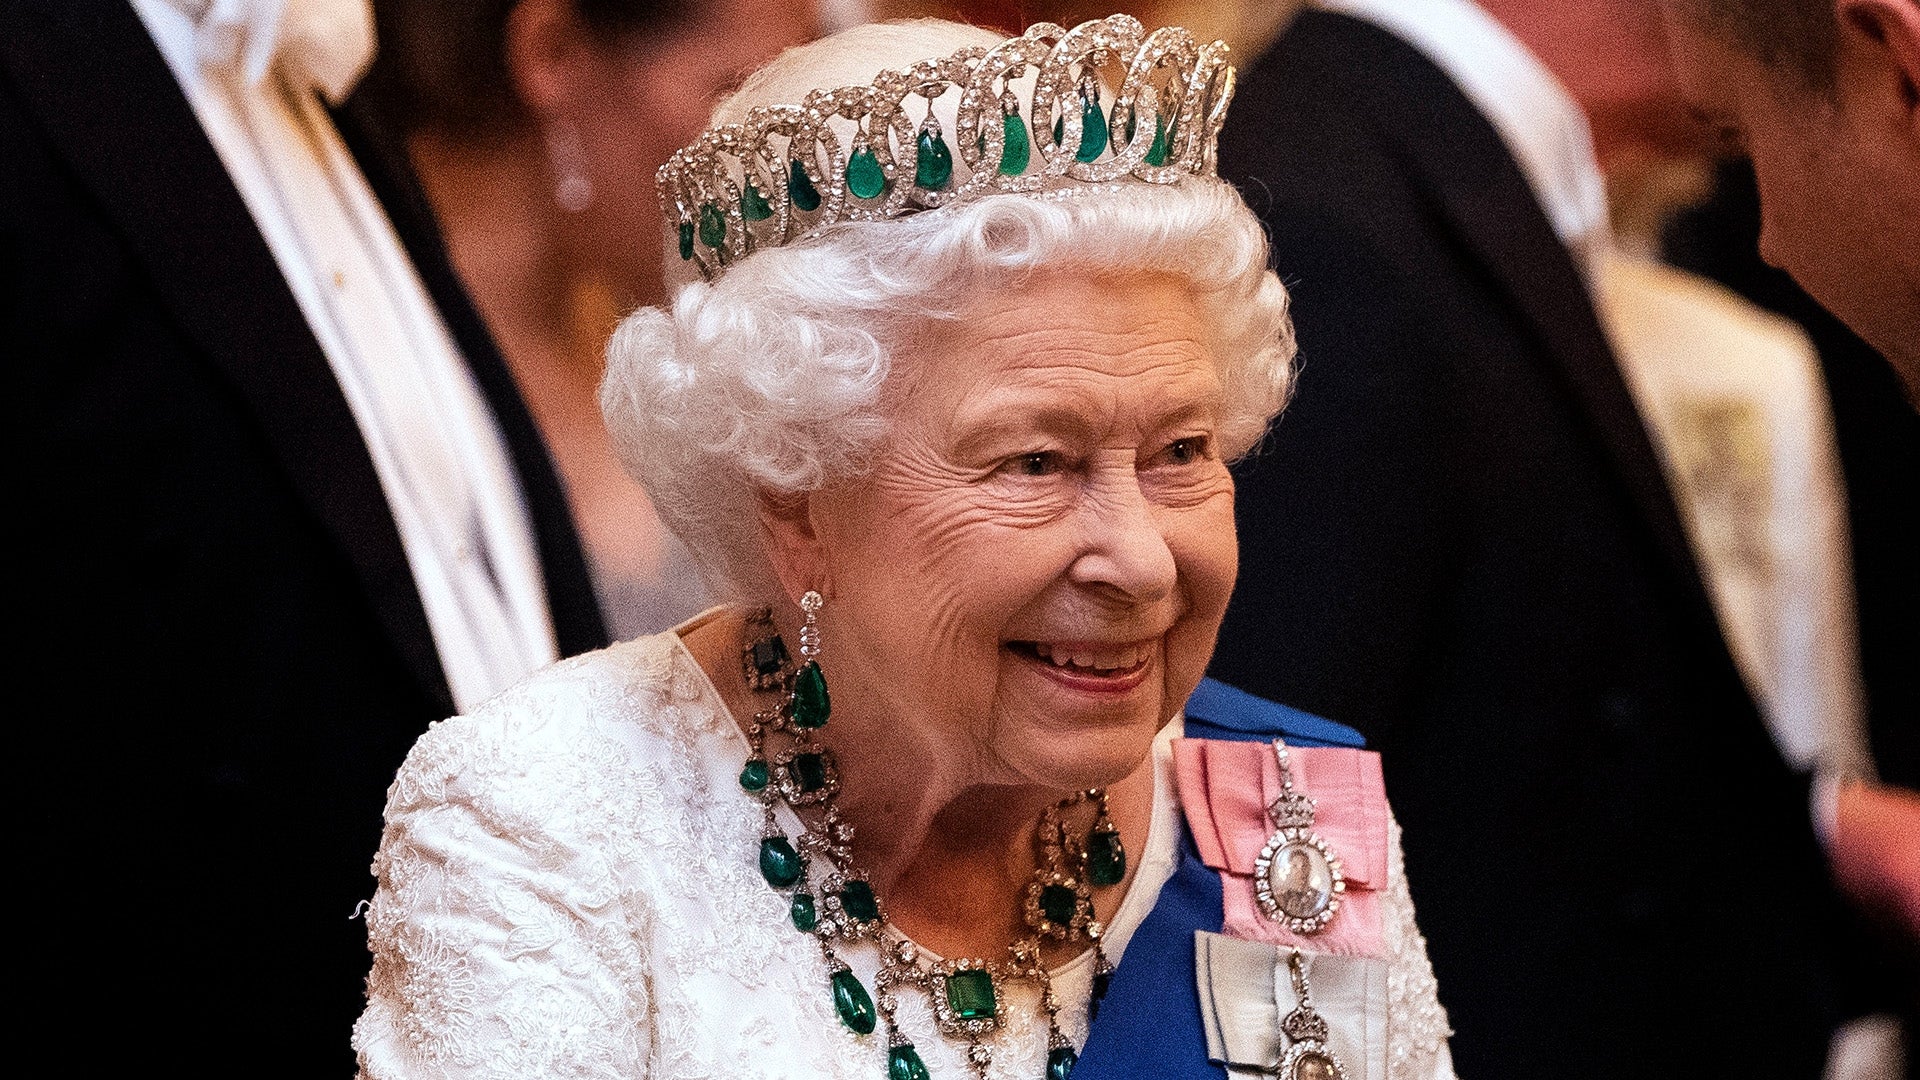 How the Crown Jewels Are Passed Down Through the Royal Family